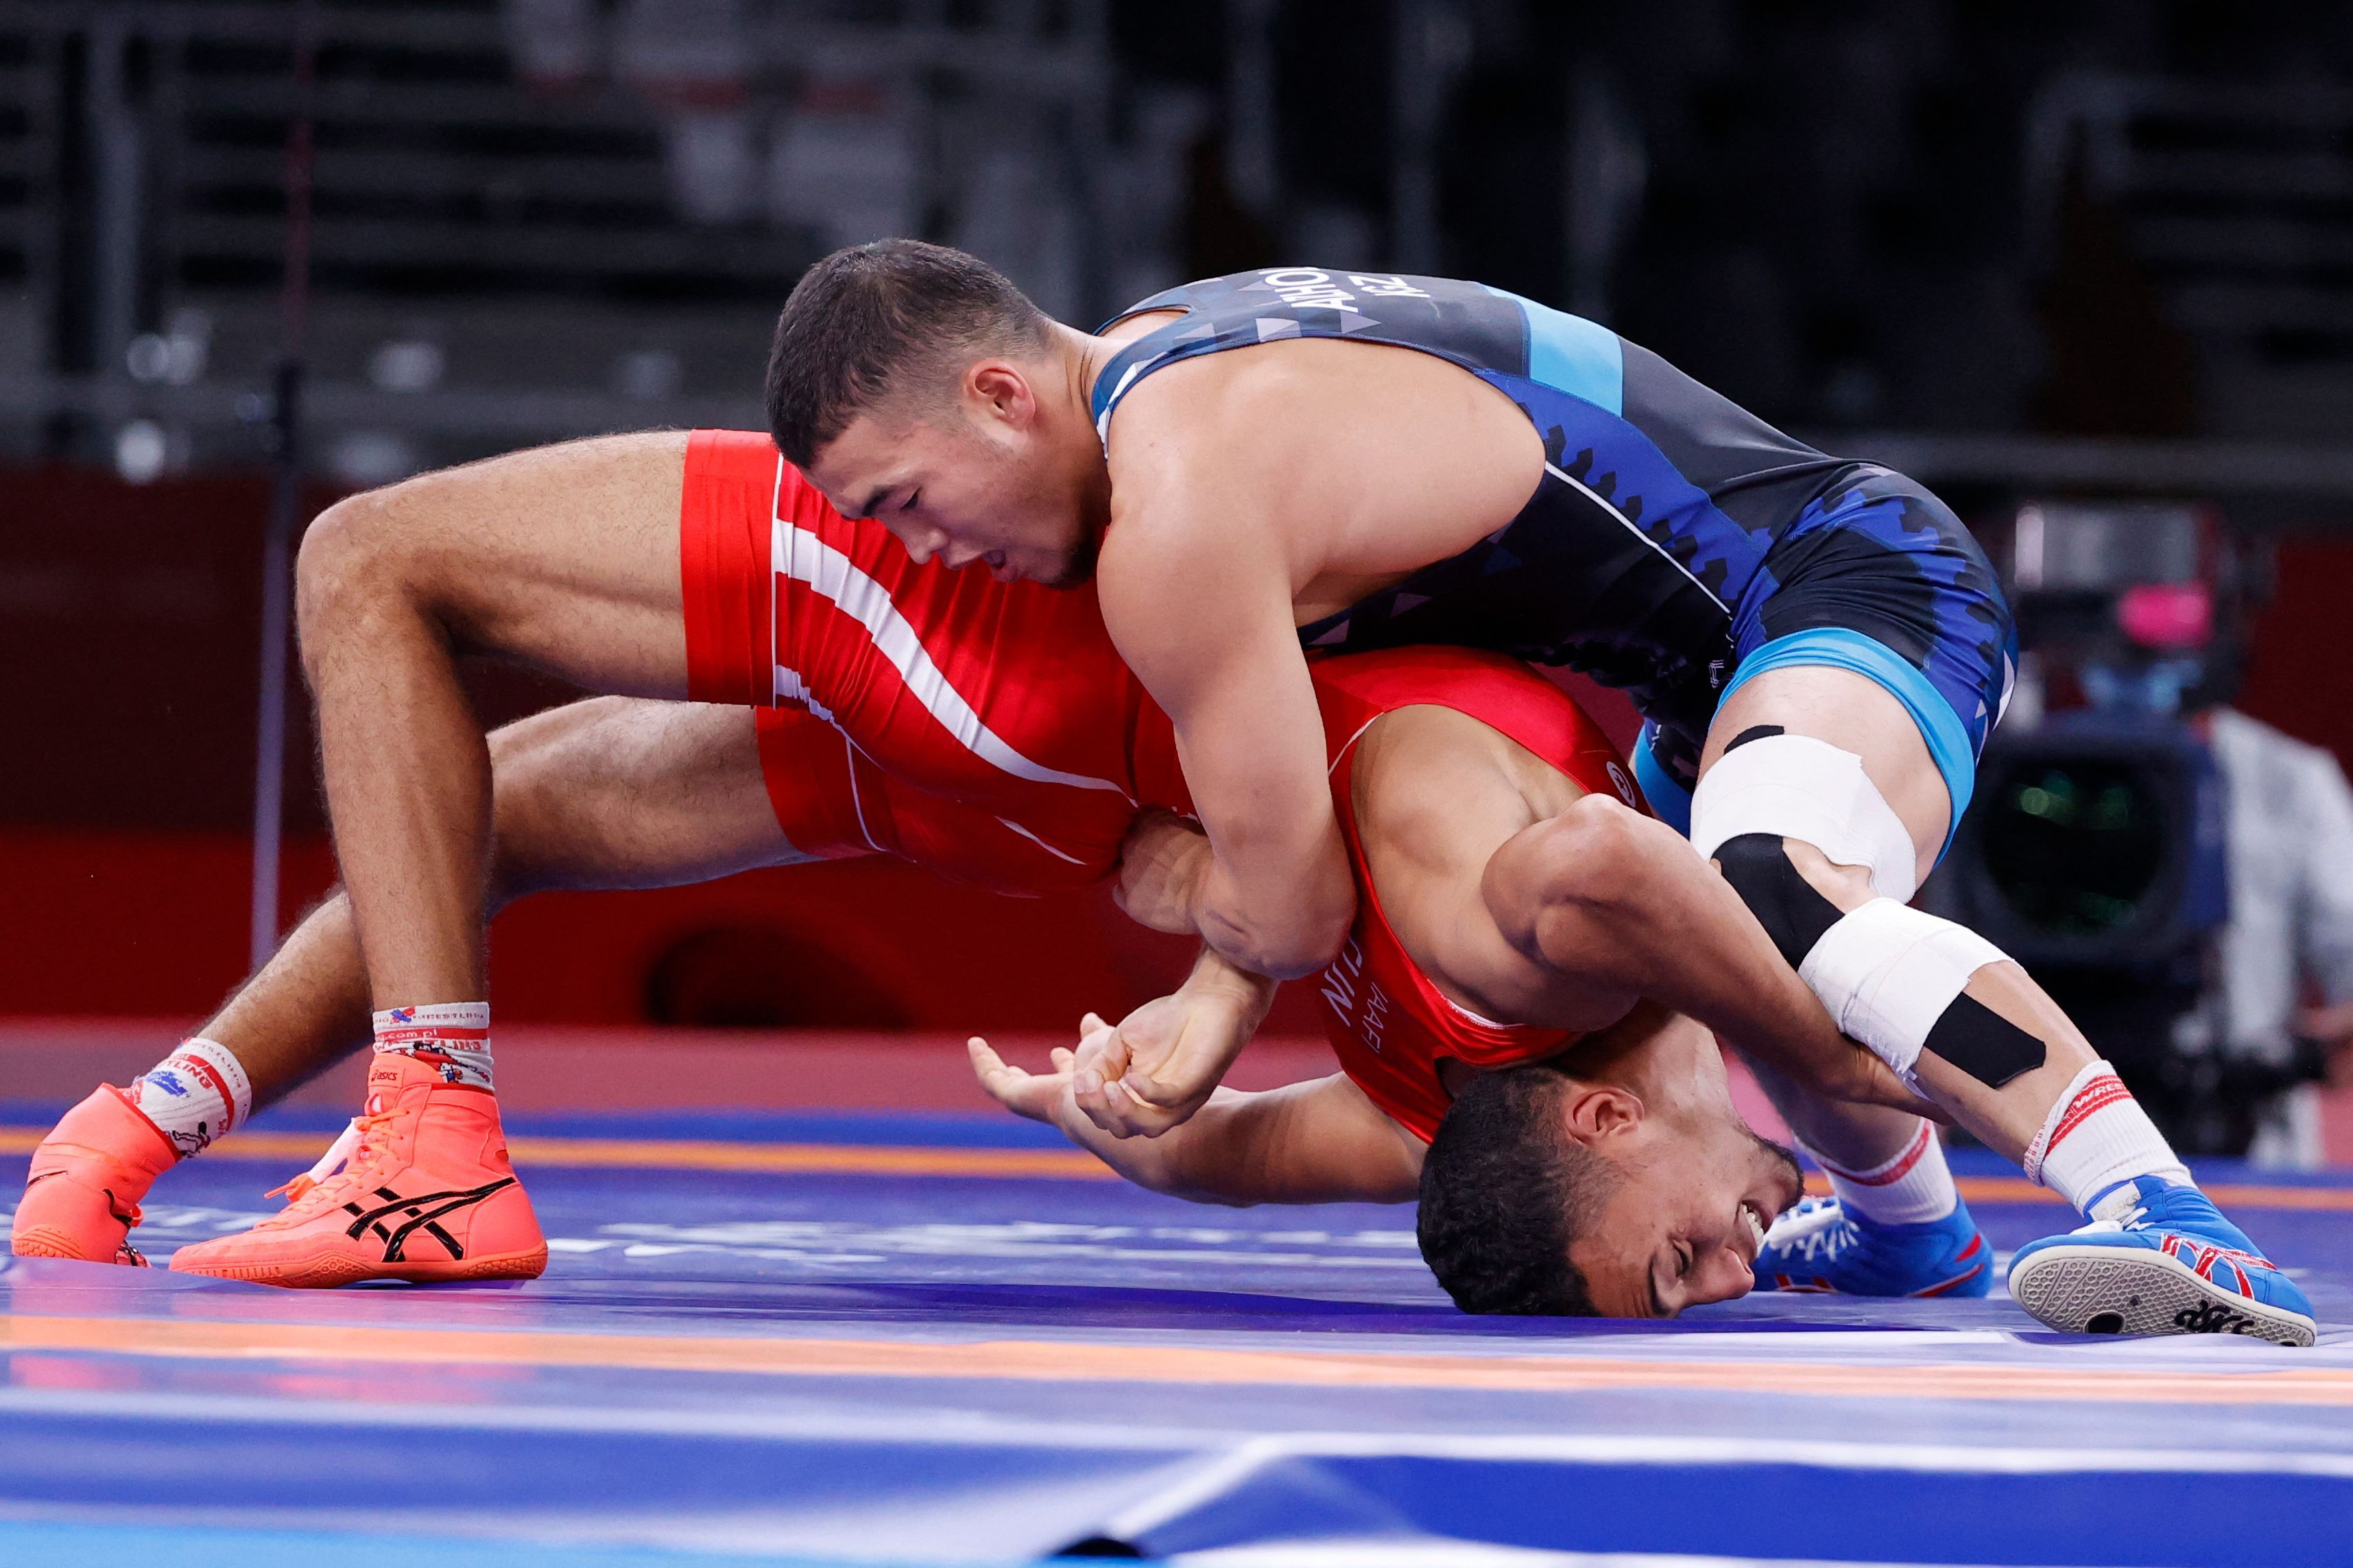 Kyrgyzstan's Akzhol Makhmudov (blue) wrestles Tunisia's Lamjed Maafi in their men's greco-roman 77kg wrestling early round match during the Tokyo 2020 Olympic Games on August 2